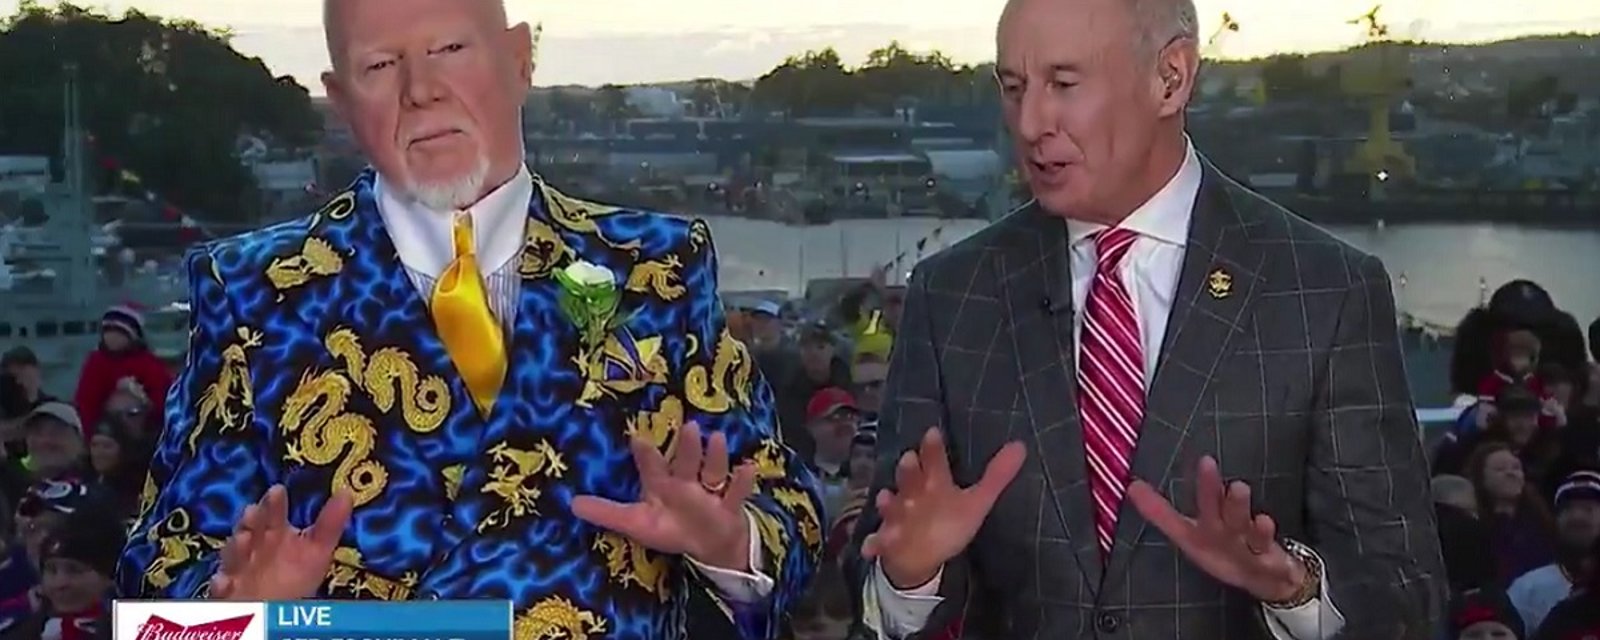 Don Cherry goes off on the Hurricanes post game celebrations.